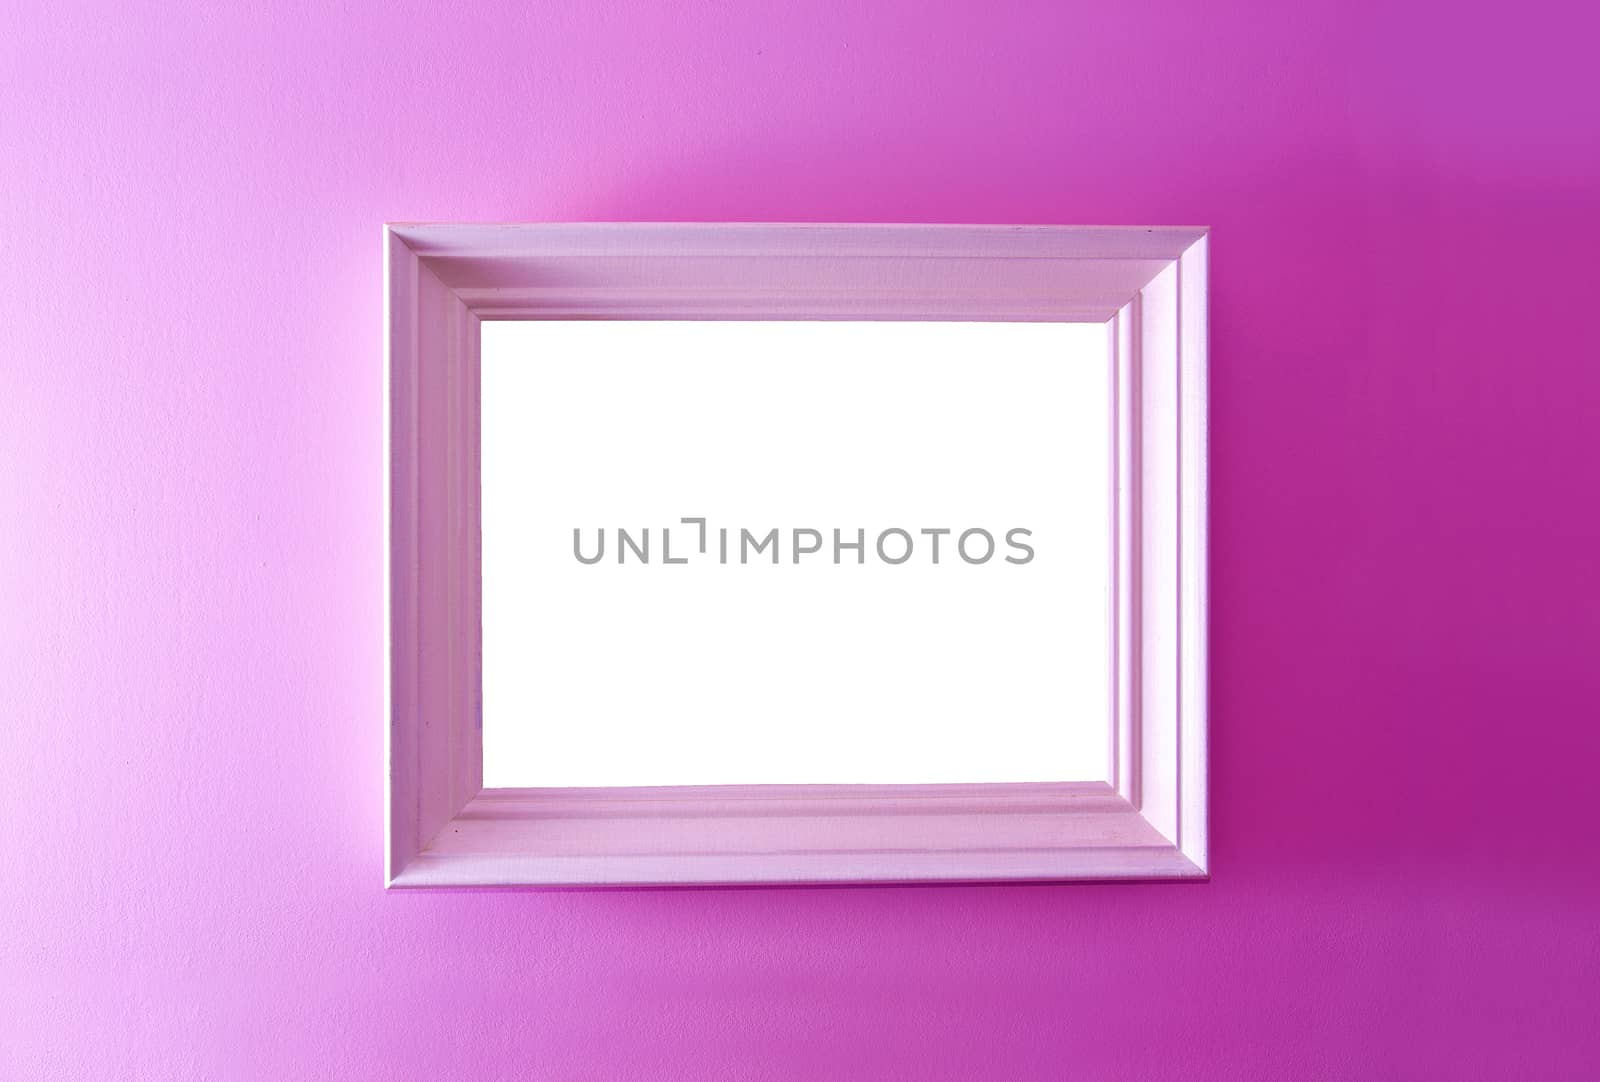 White empty frame on the pink wall. Free copy space.